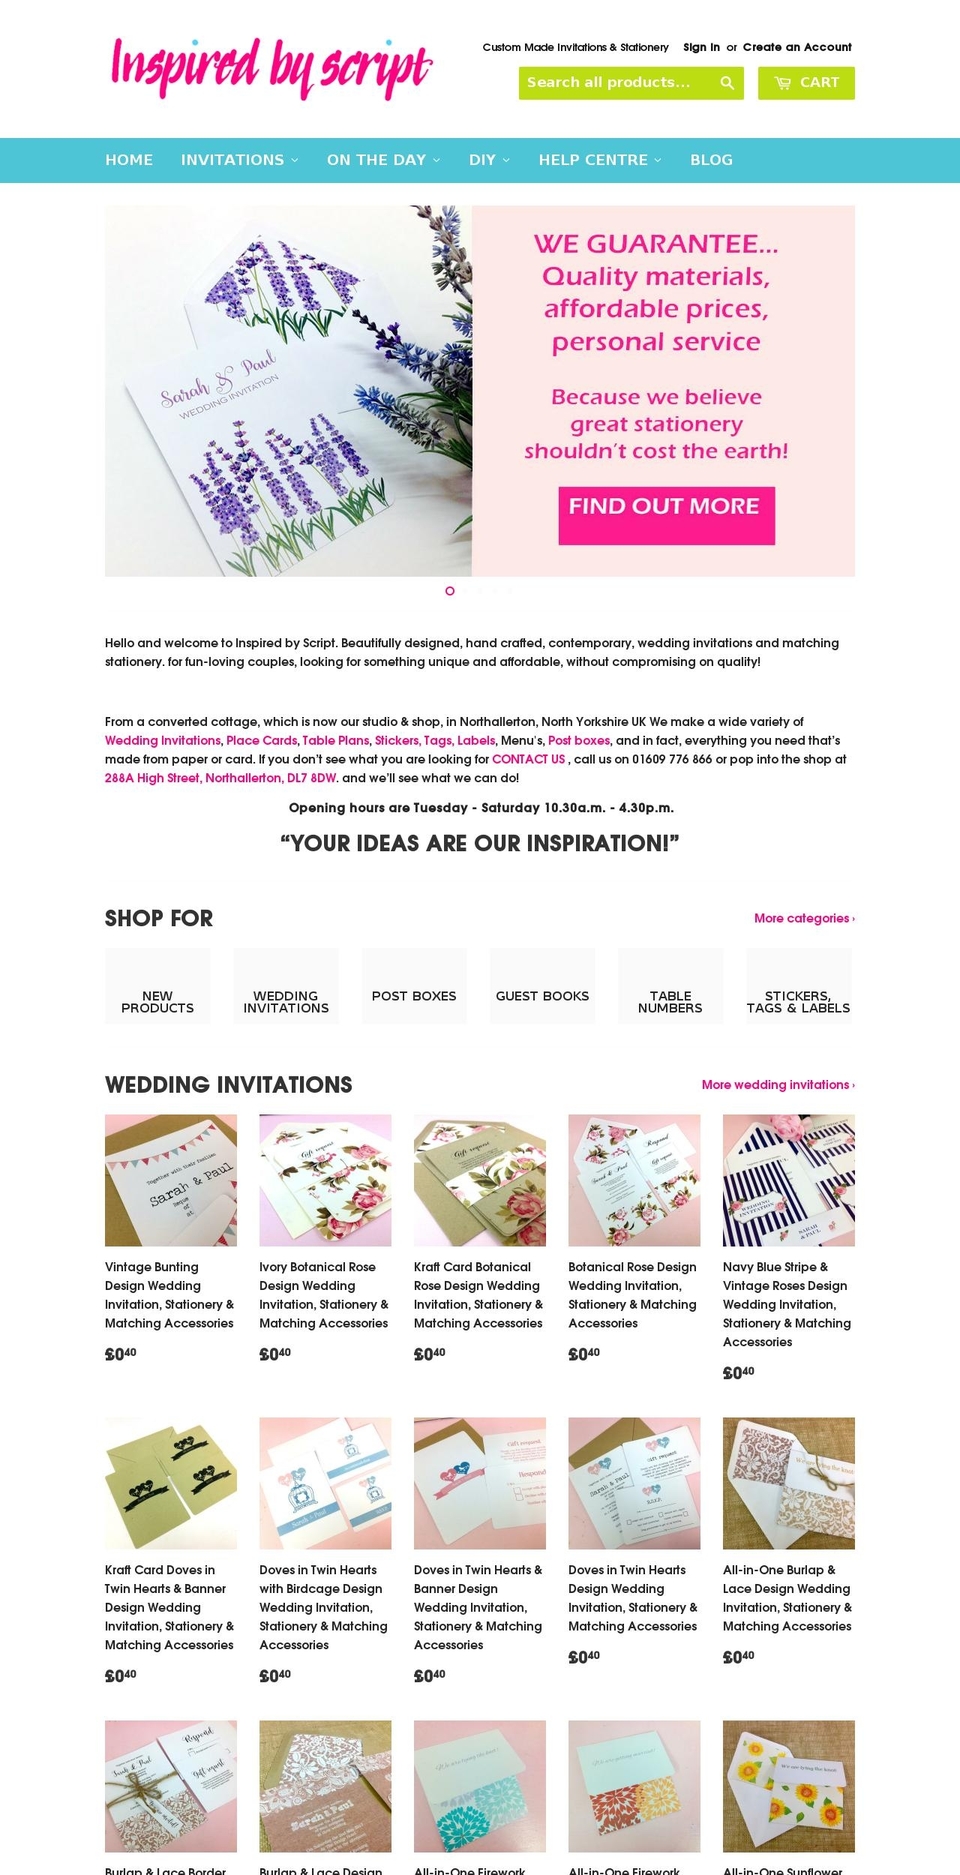 Supply Shopify theme site example inspiredbyscript.co.uk